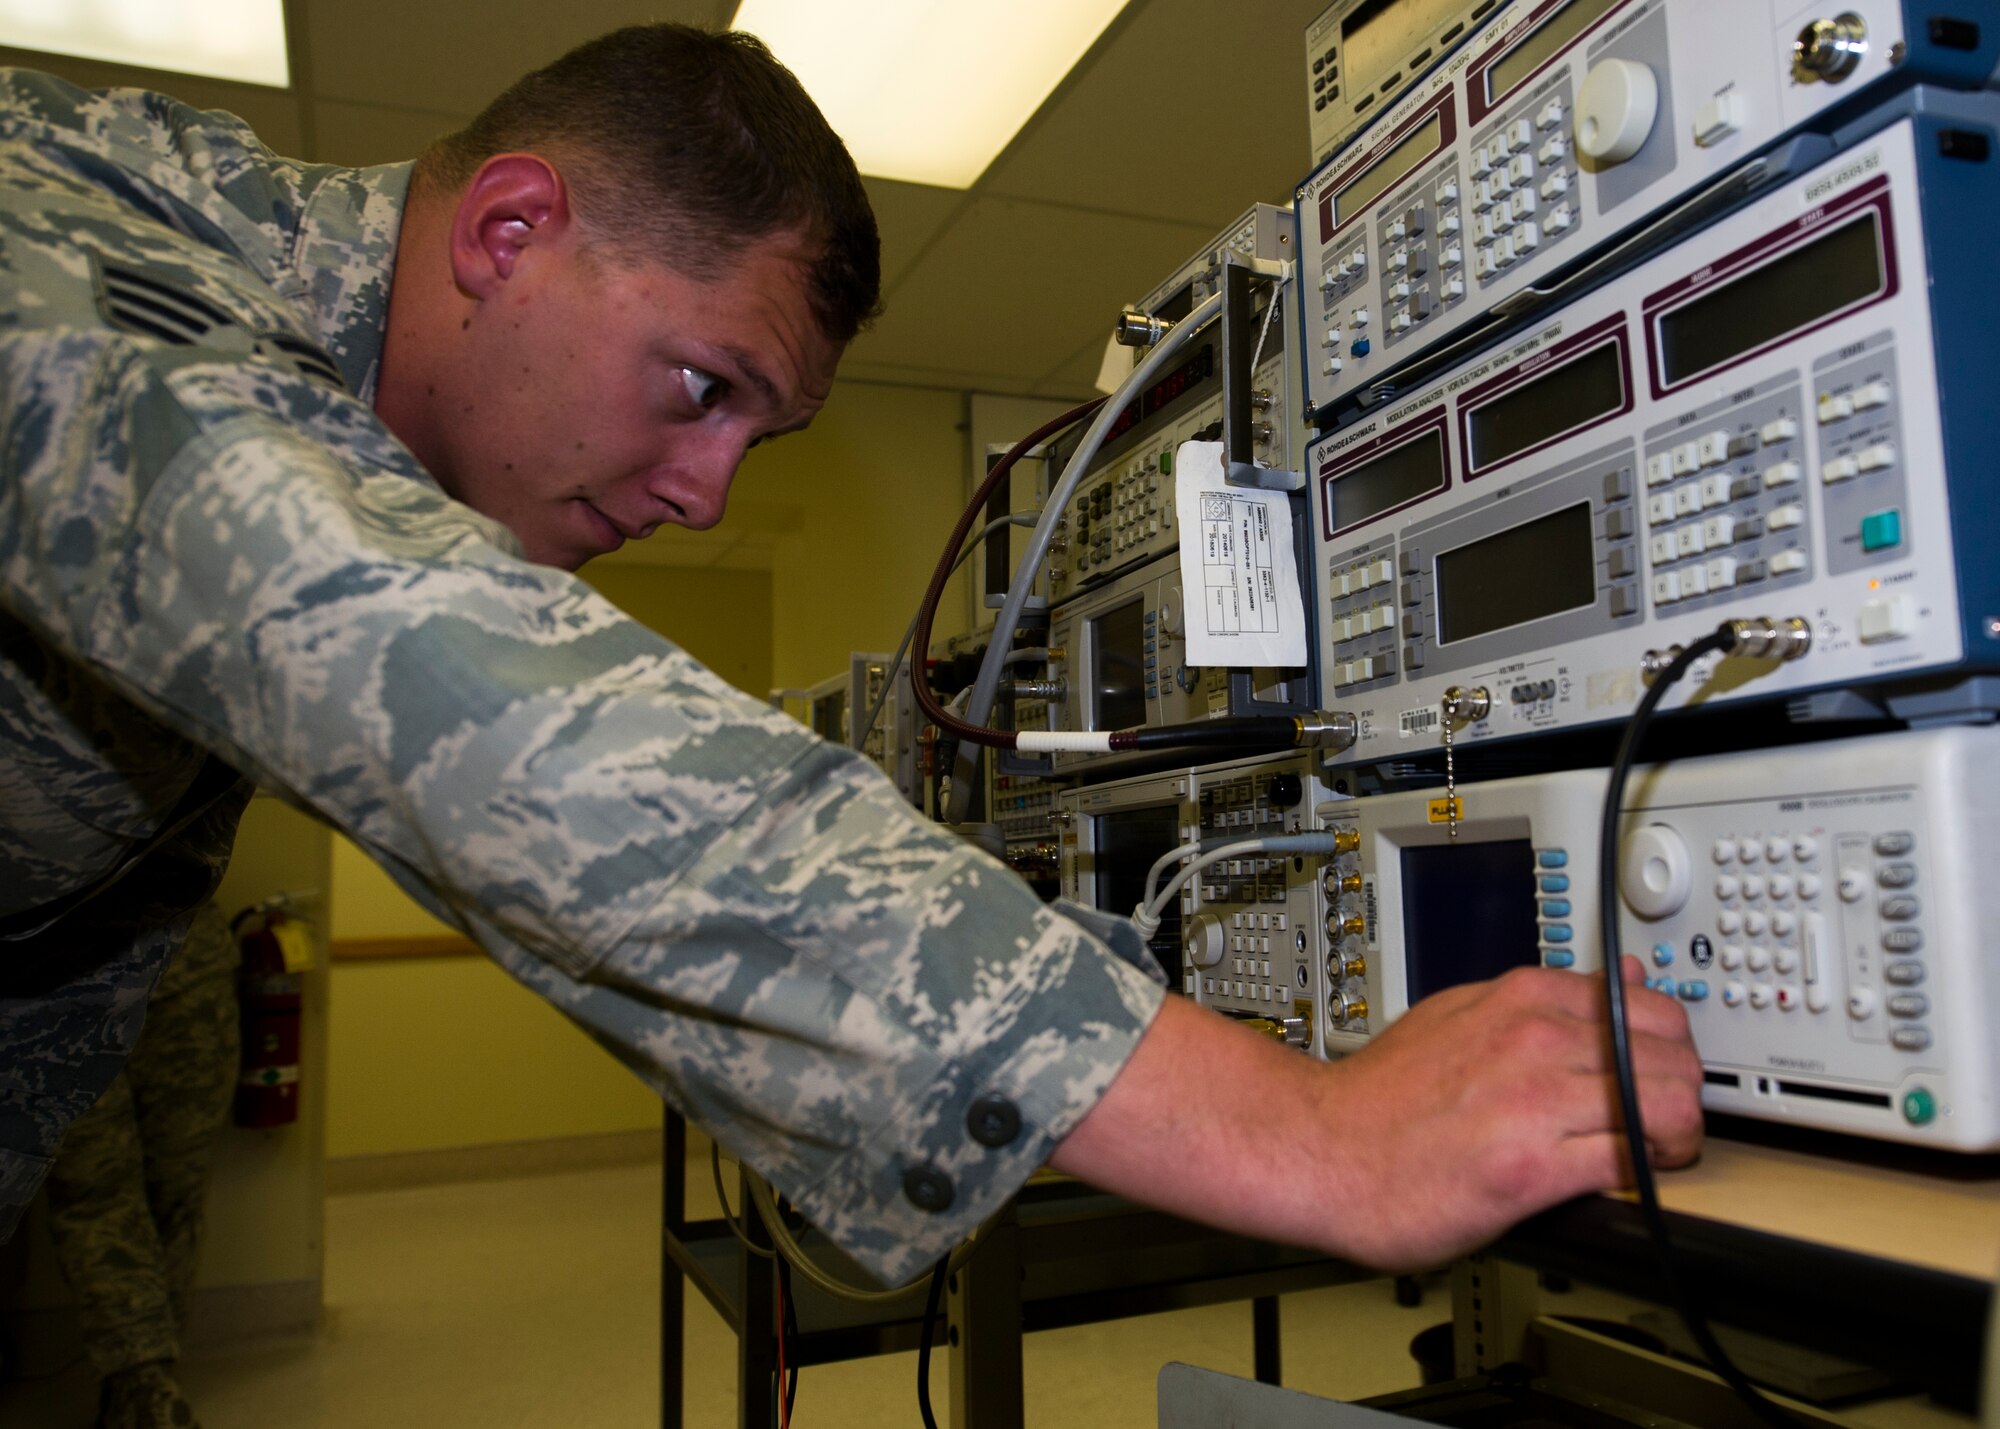 Senior Airman Trace Taft, a Precision Measurement Equipment Laboratory technician with the 49th Maintenance Squadron, checks a radio test set at PMEL May 28, 2015 at Holloman Air Force Base, N.M. Radio test sets are used to test beacons for pilots in case of an emergency ejection. (U.S. Air Force photo by Airman 1st Class Emily A. Kenney/Released)